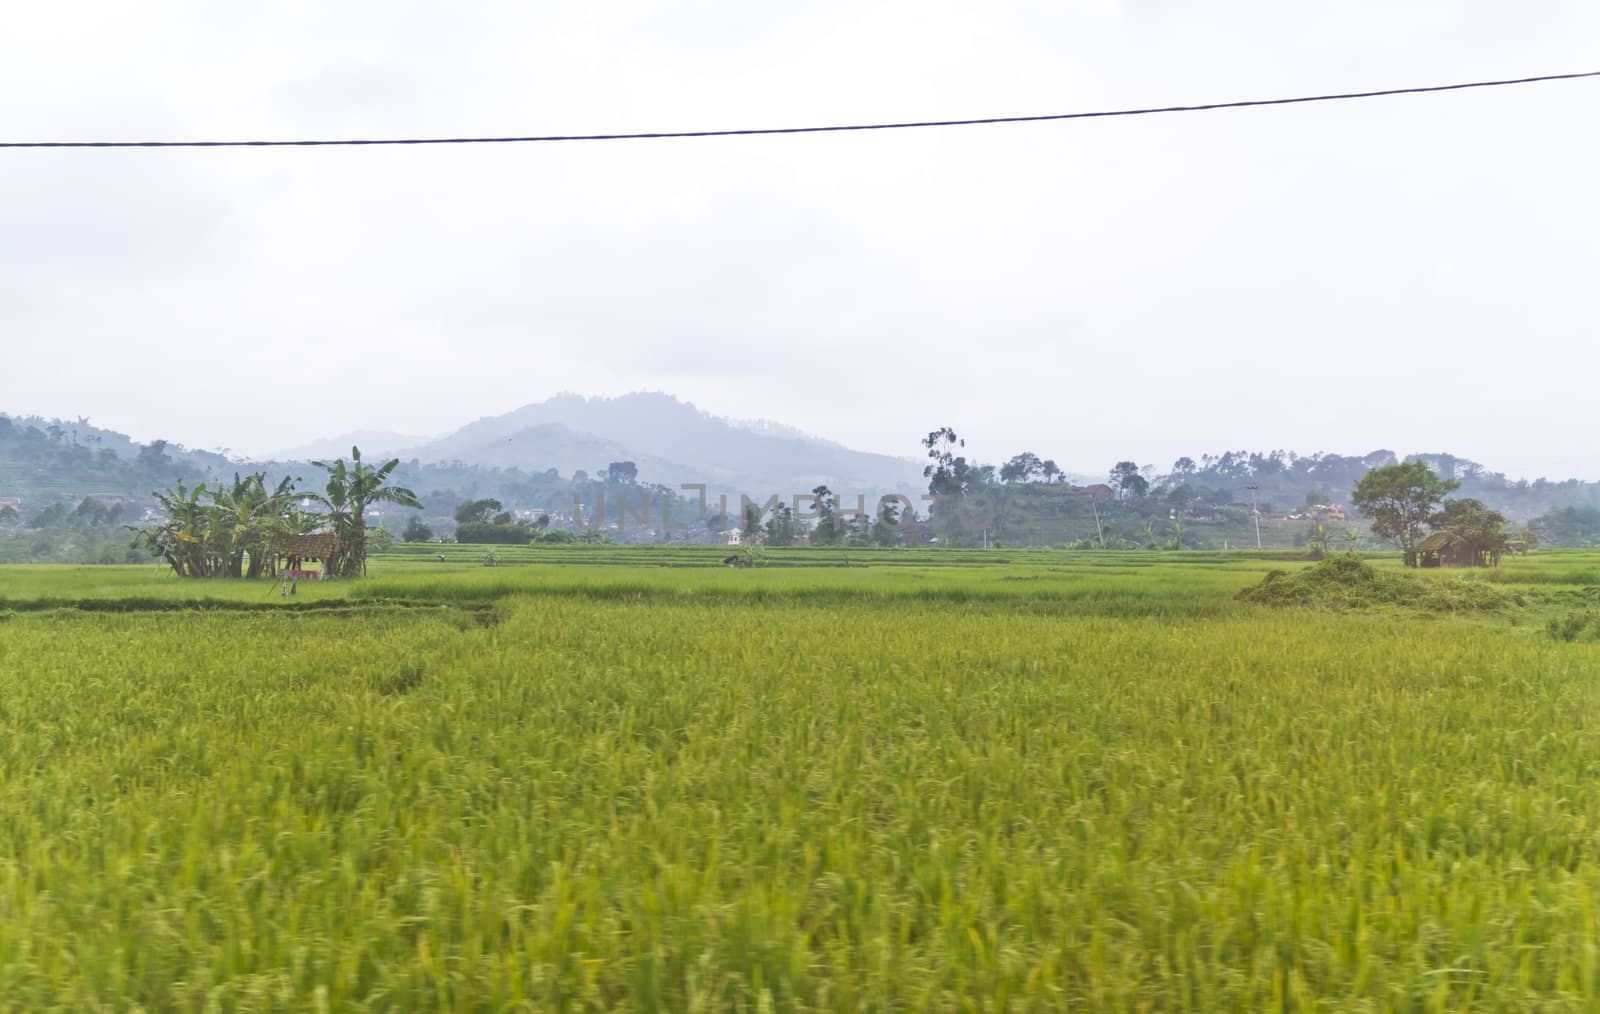 view of a paddy field taken from moving vehicle in Bandung, West Jawa